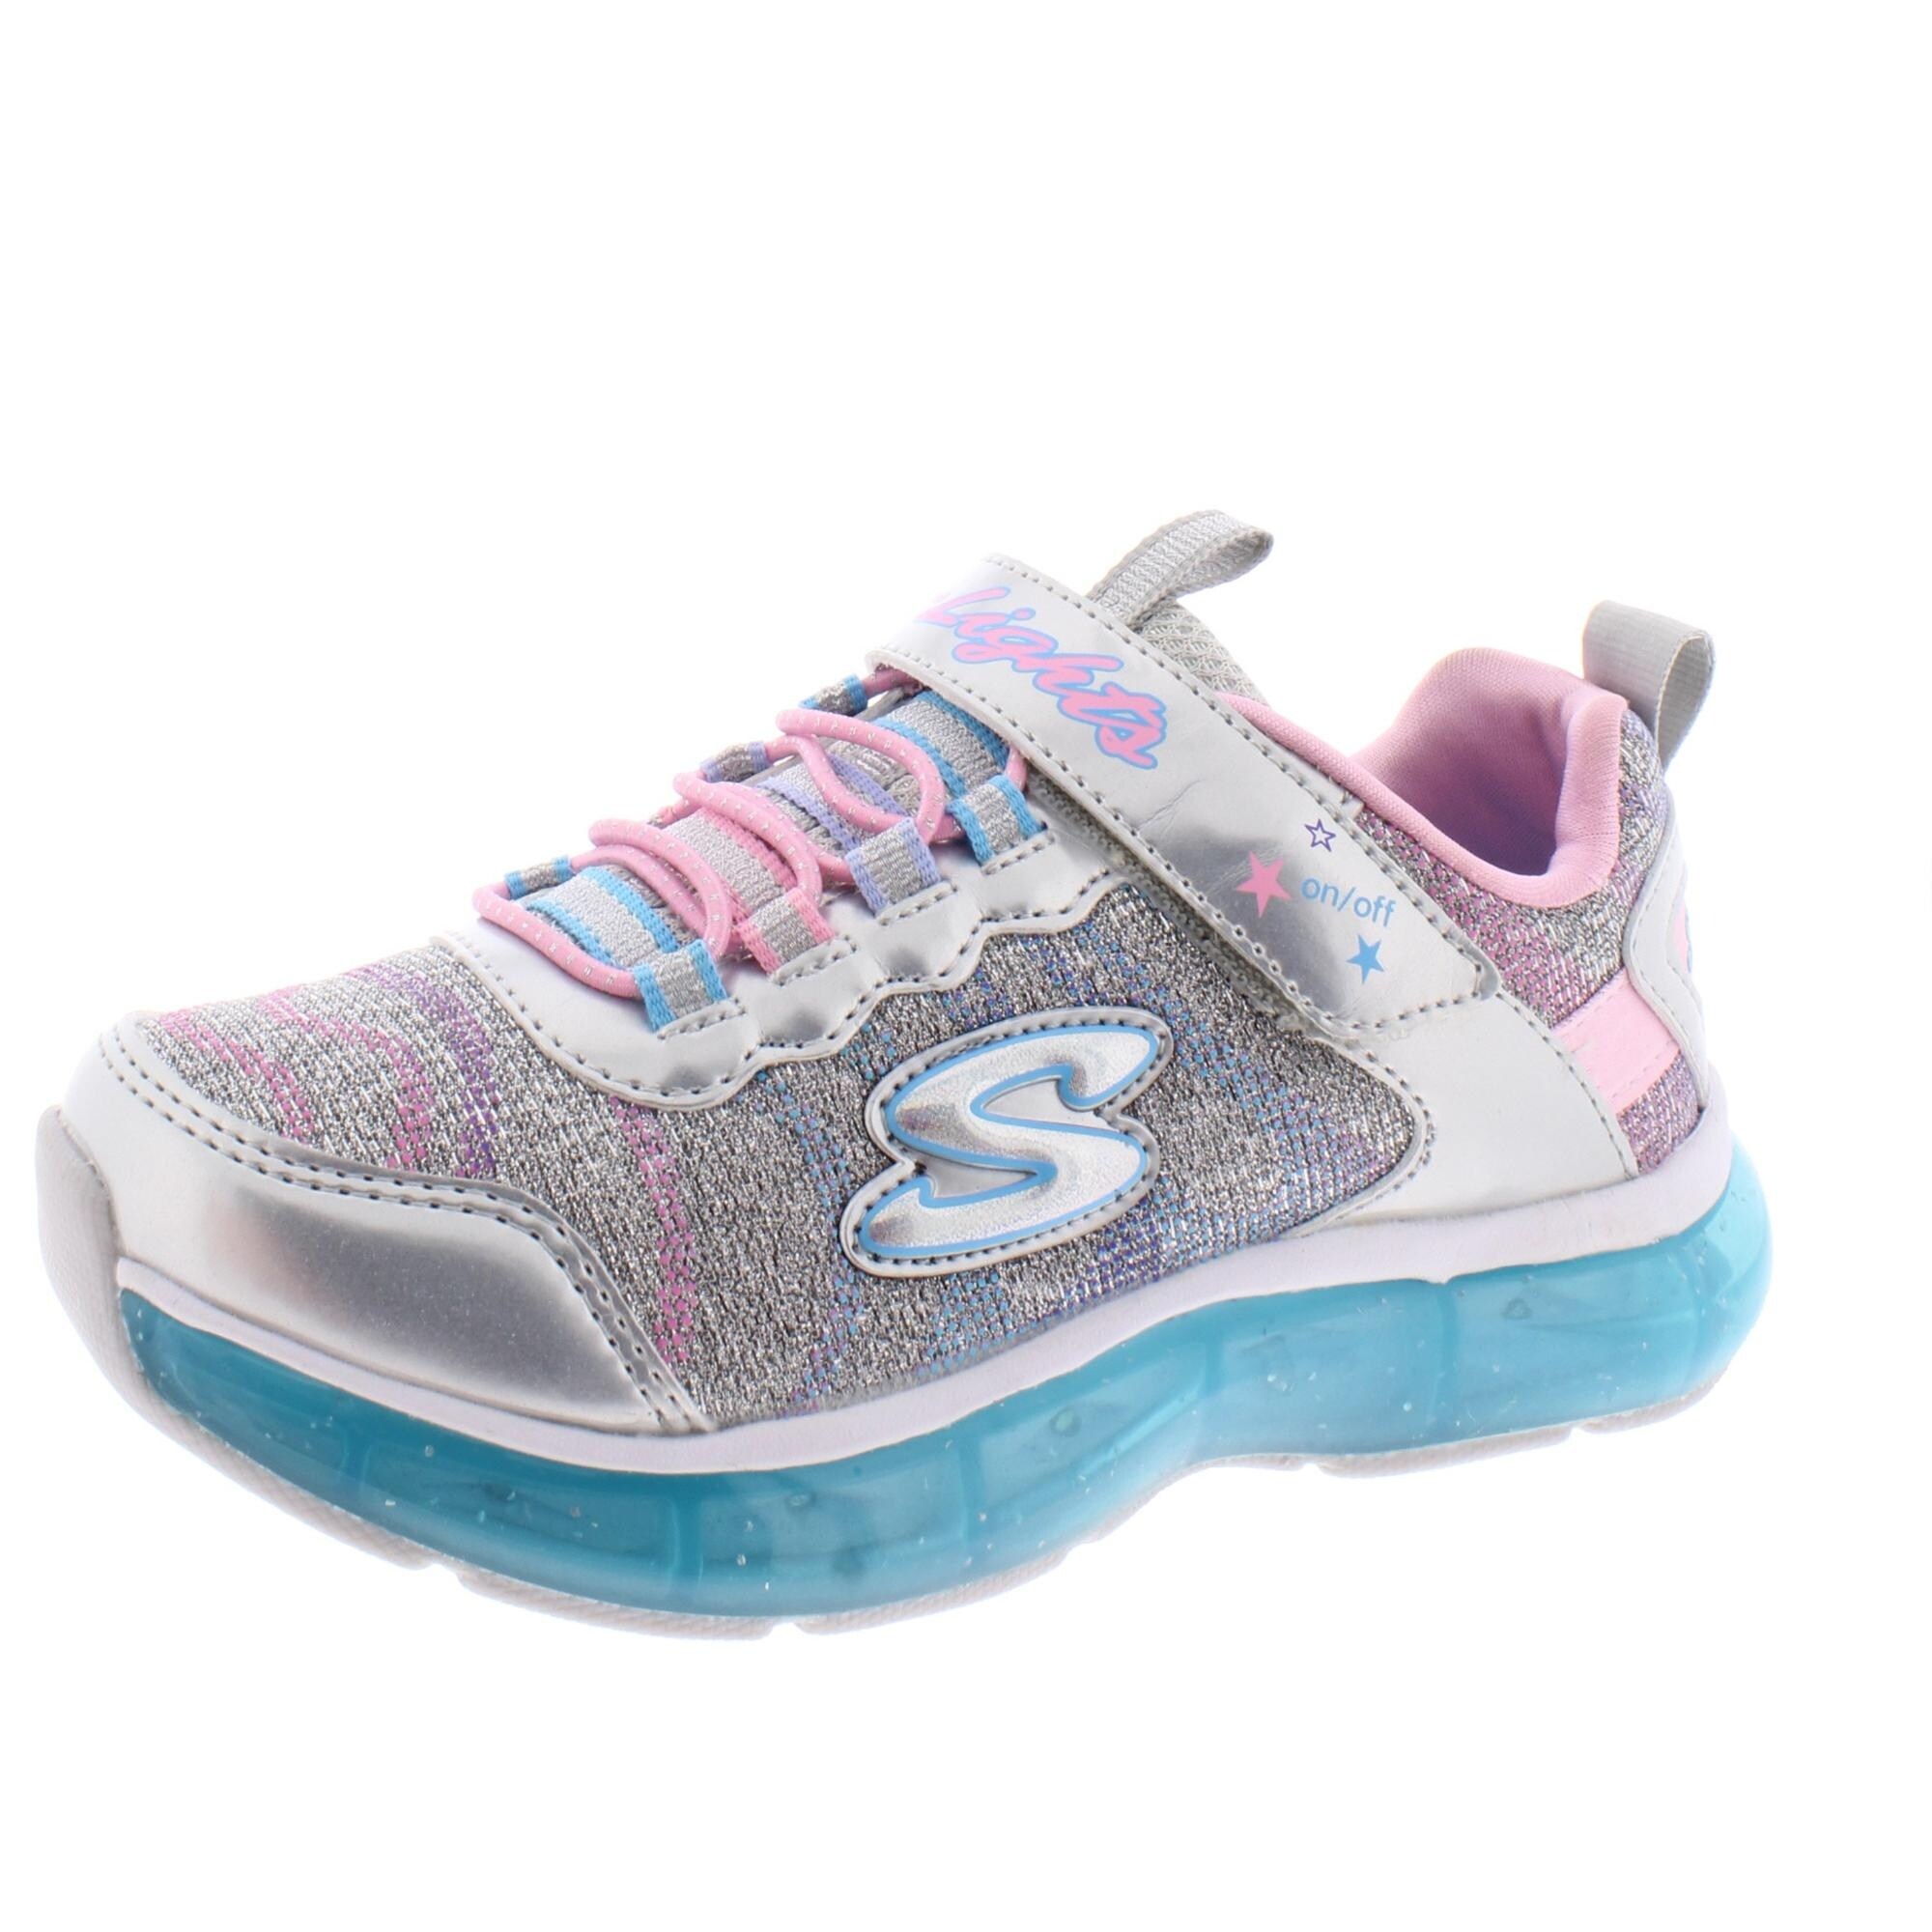 skechers childrens light up trainers